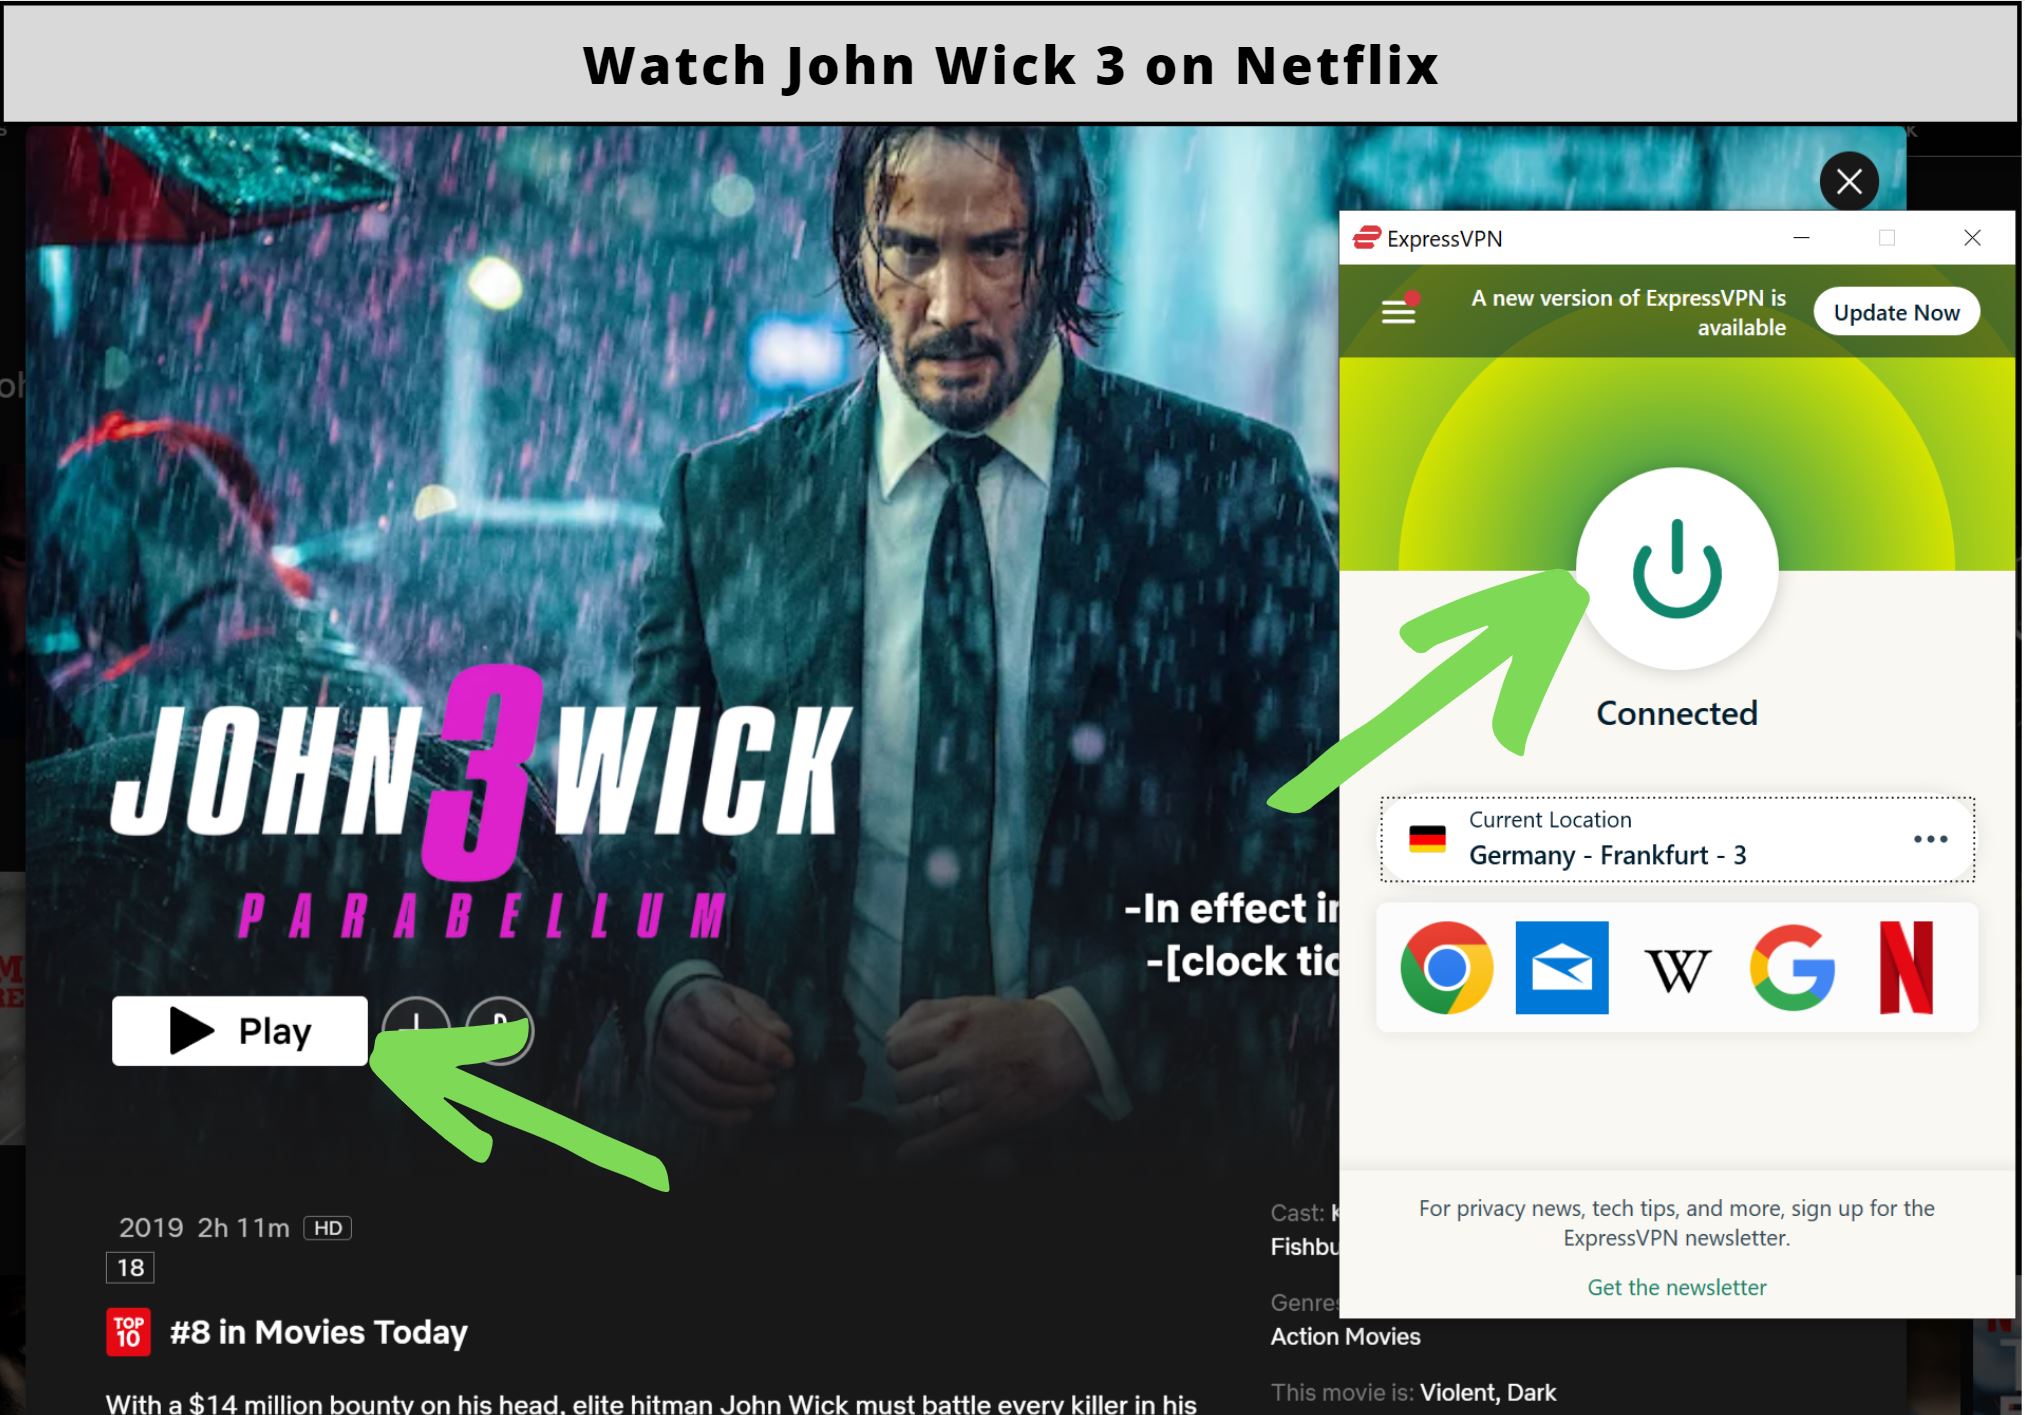 How to Watch John Wick 3 - Parallebum on Netflix?